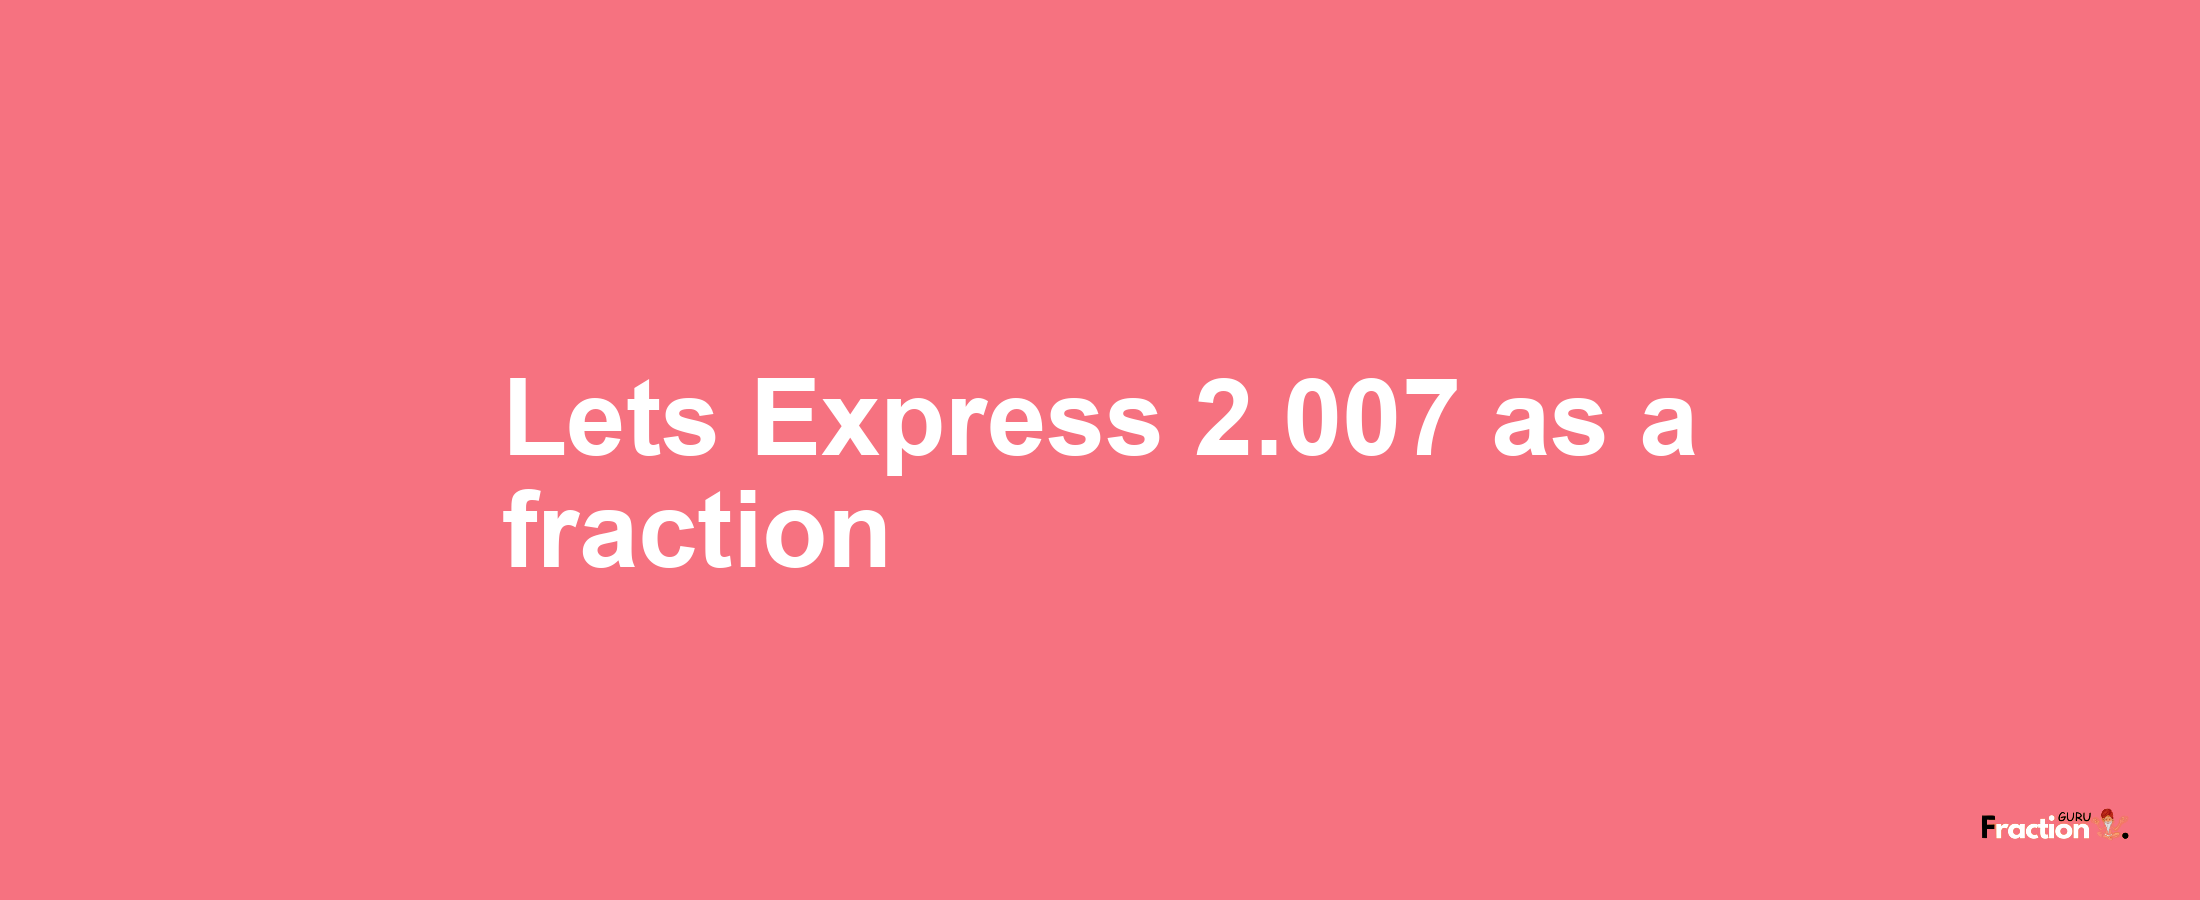 Lets Express 2.007 as afraction